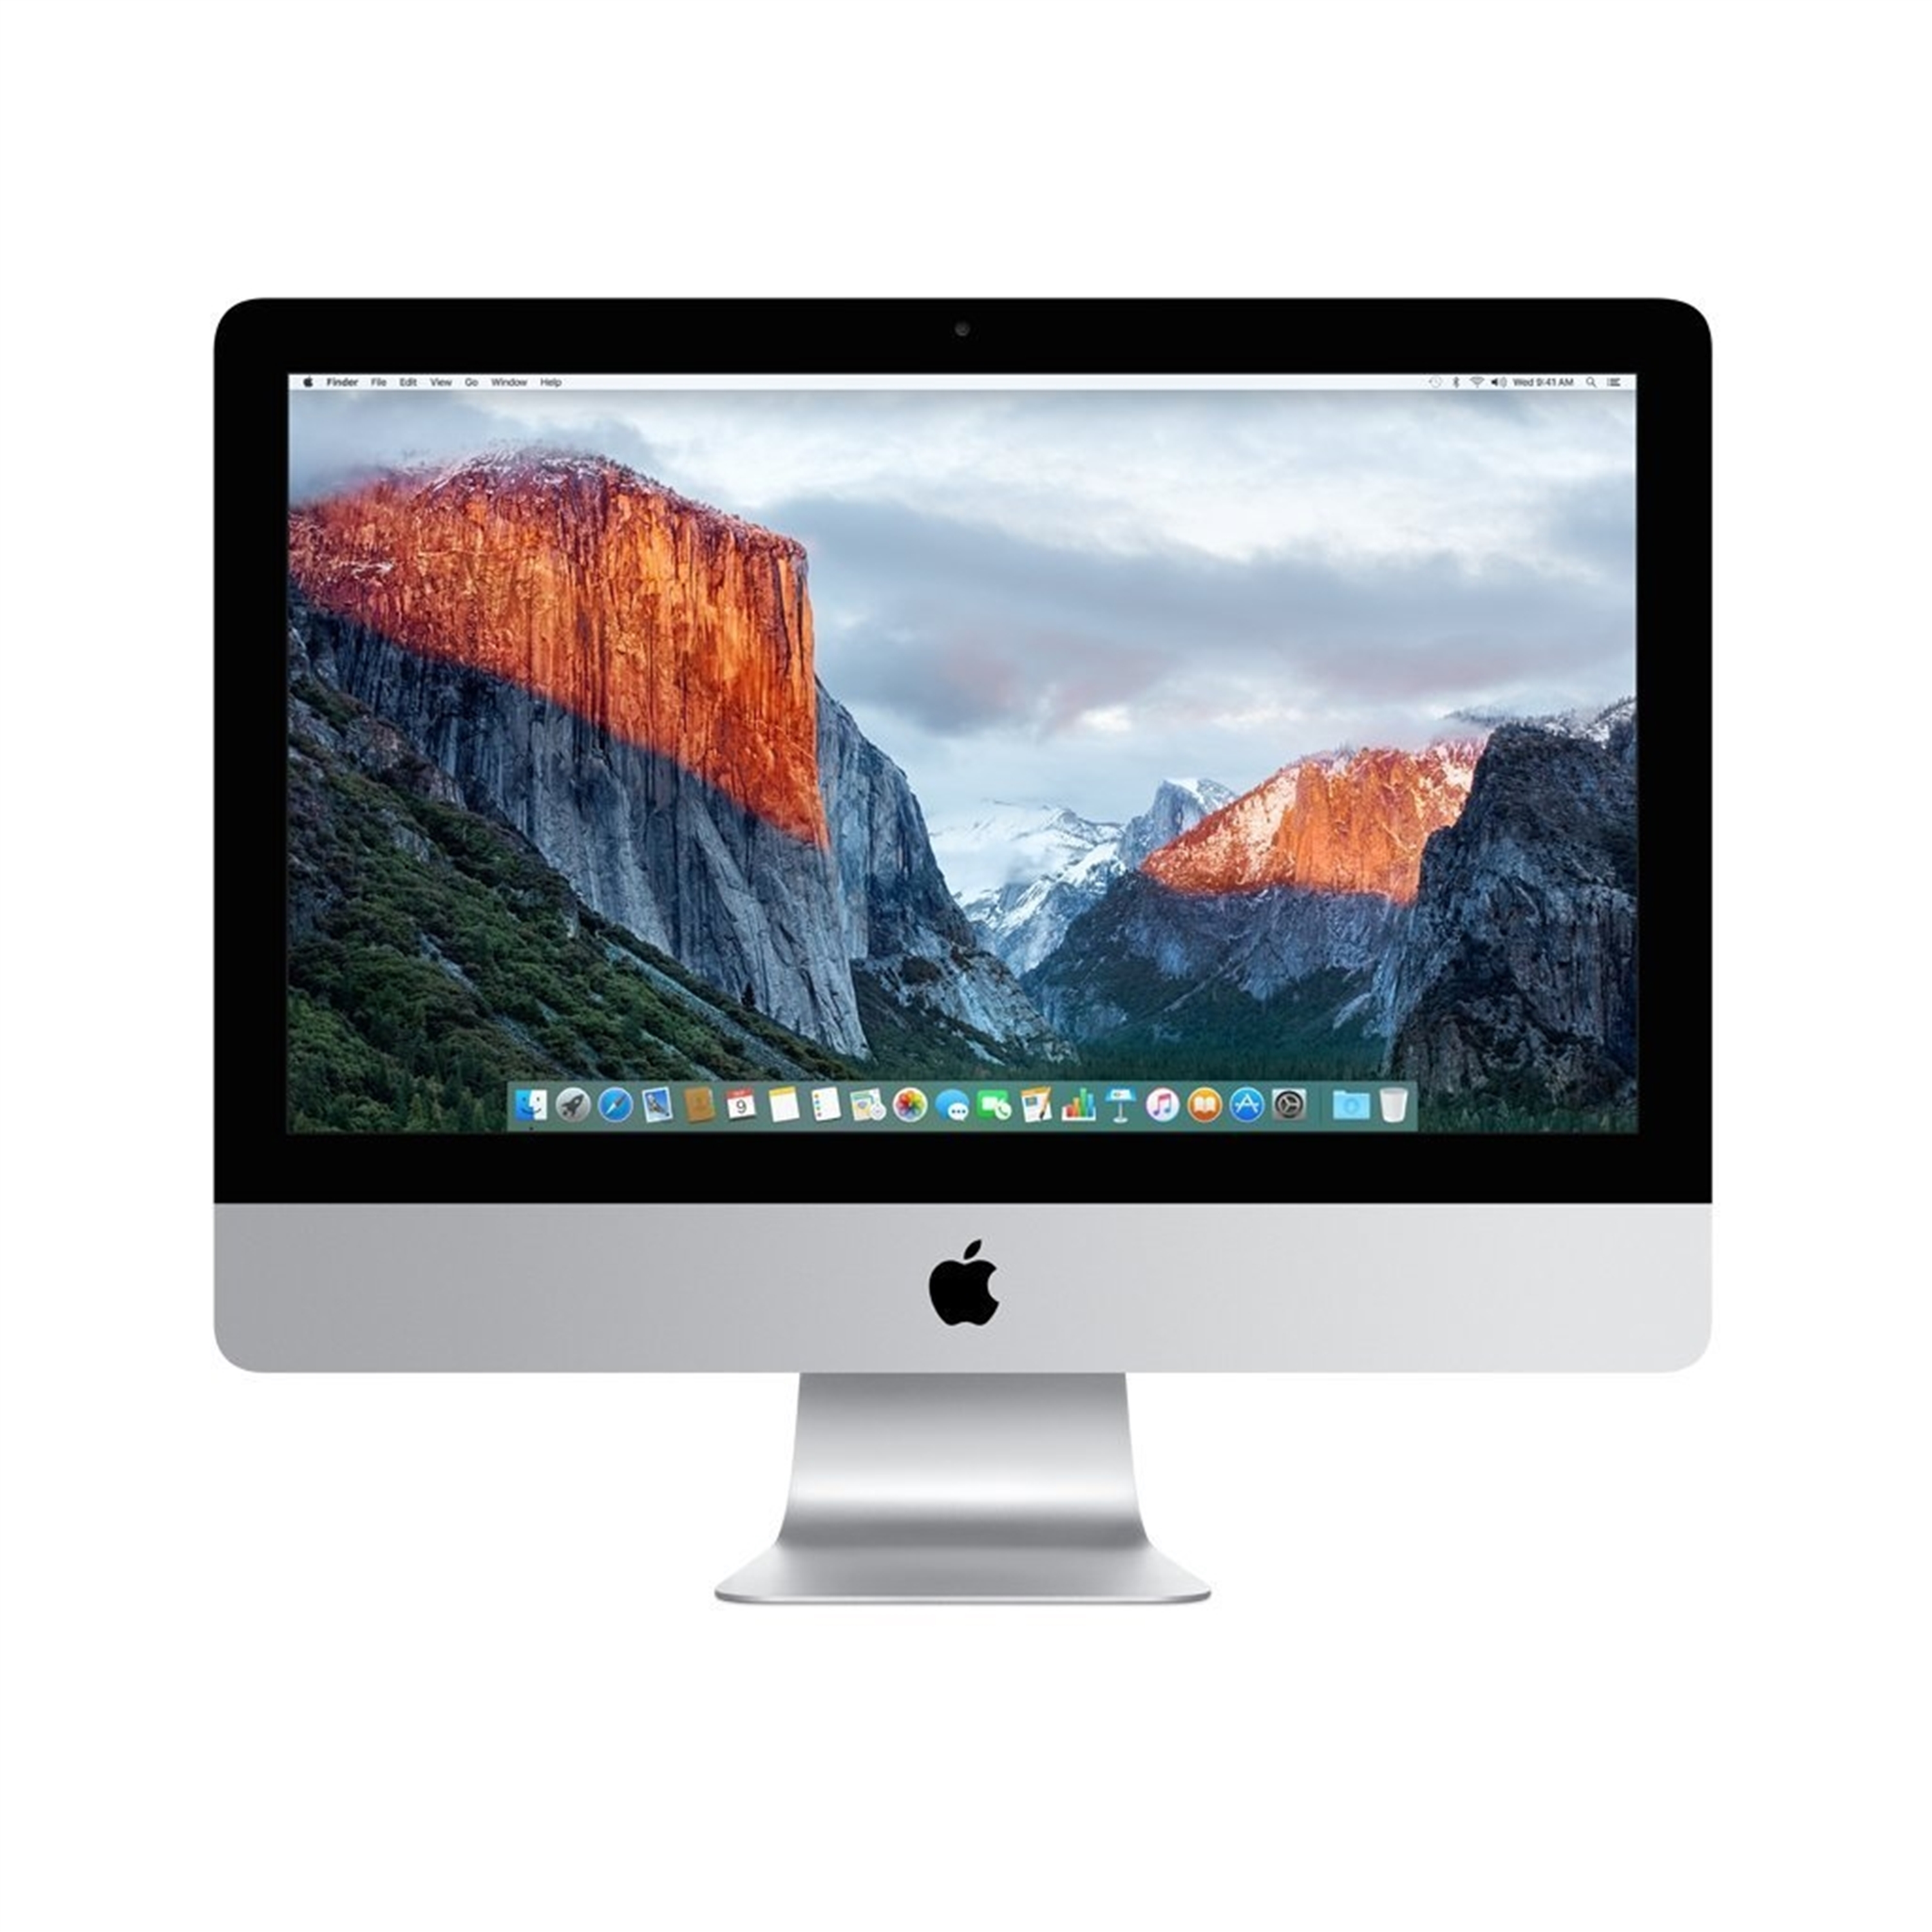 Apple iMac MK142LL/A 21.5" 8GB 1TB Core™ i5-5250U 1.6GHz Mac OSX,&nbsp;Silver (Used) - image 3 of 3